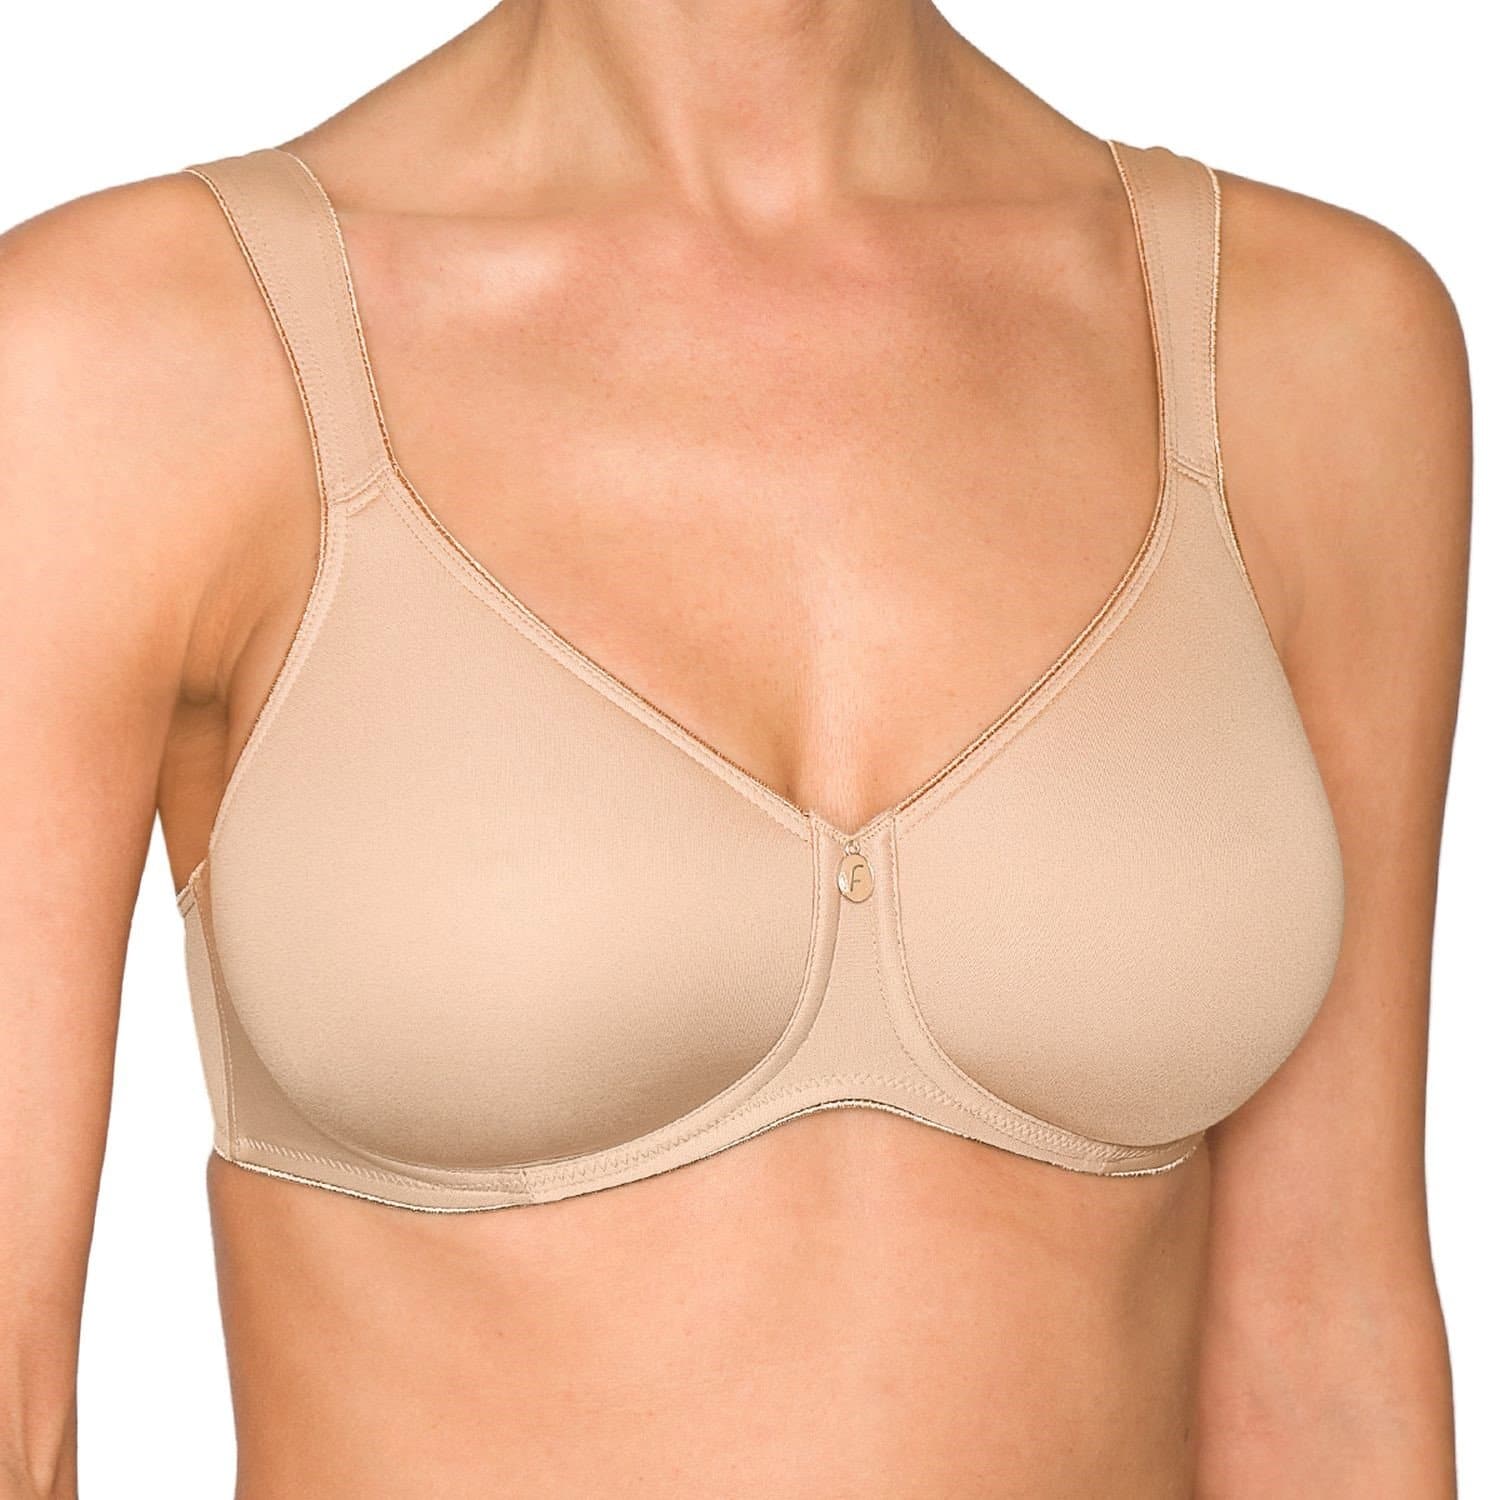 Pure Balance Underwire Spacer Bra in Sand, worn by model in front view product image.